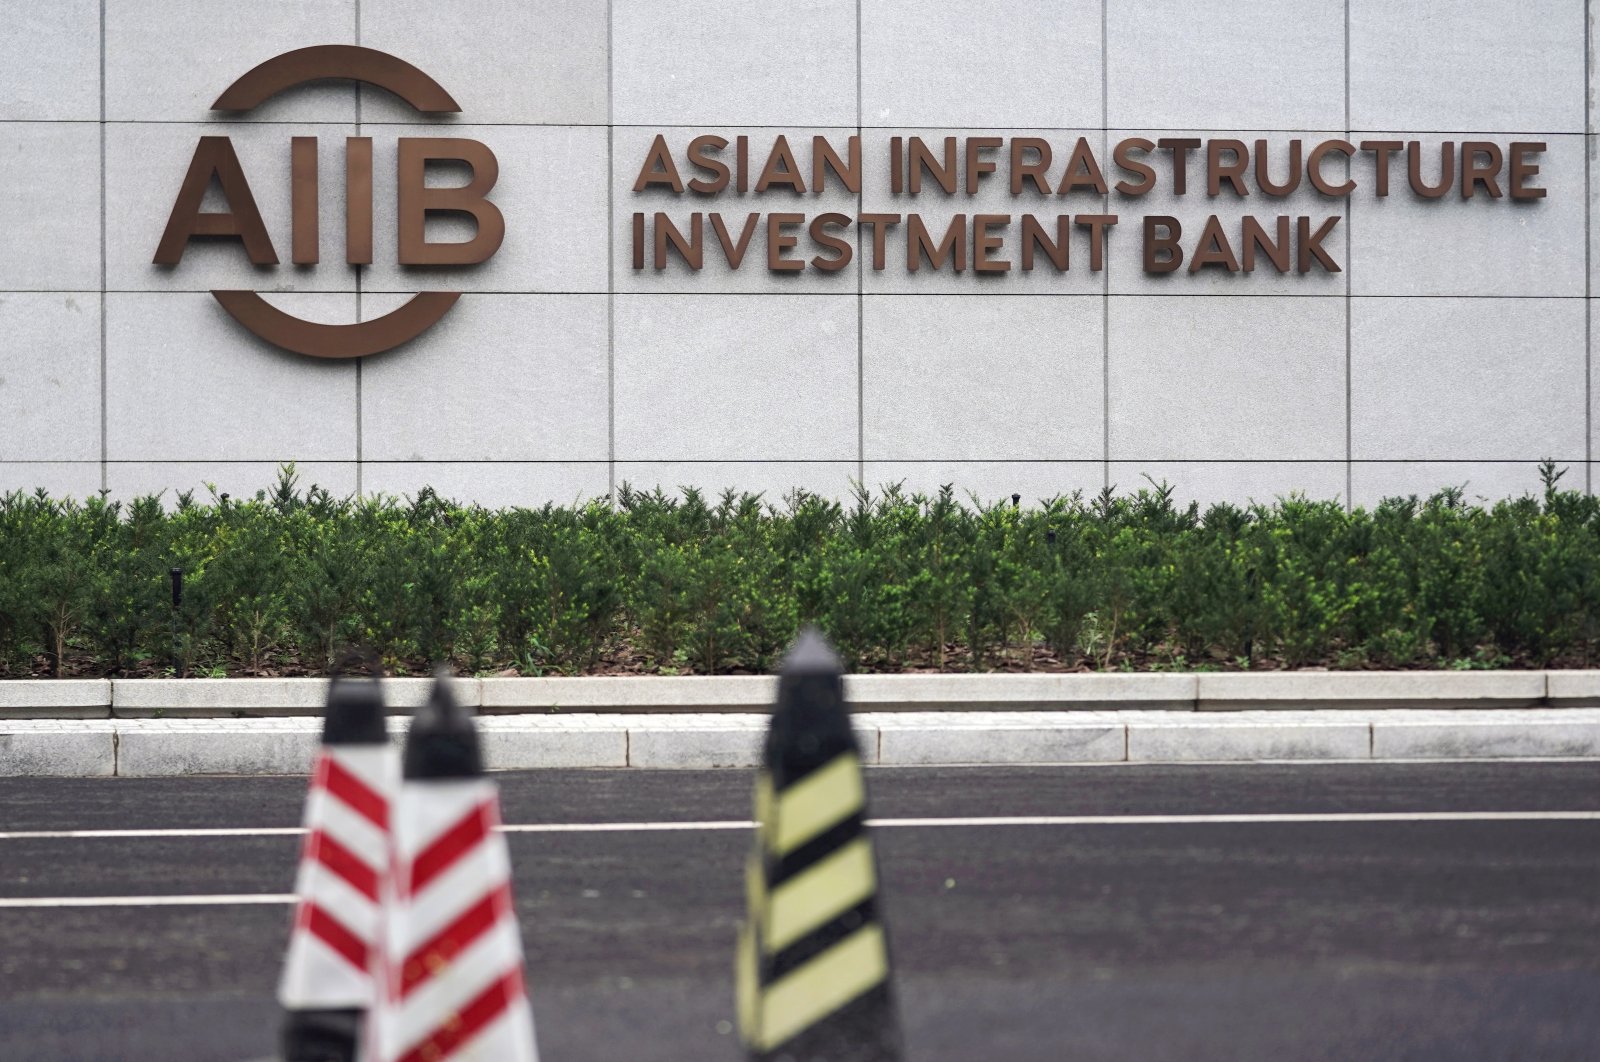 The sign of the Asian Infrastructure Investment Bank (AIIB) is pictured at its headquarters in Beijing, China, July 27, 2020. (Reuters Photo)